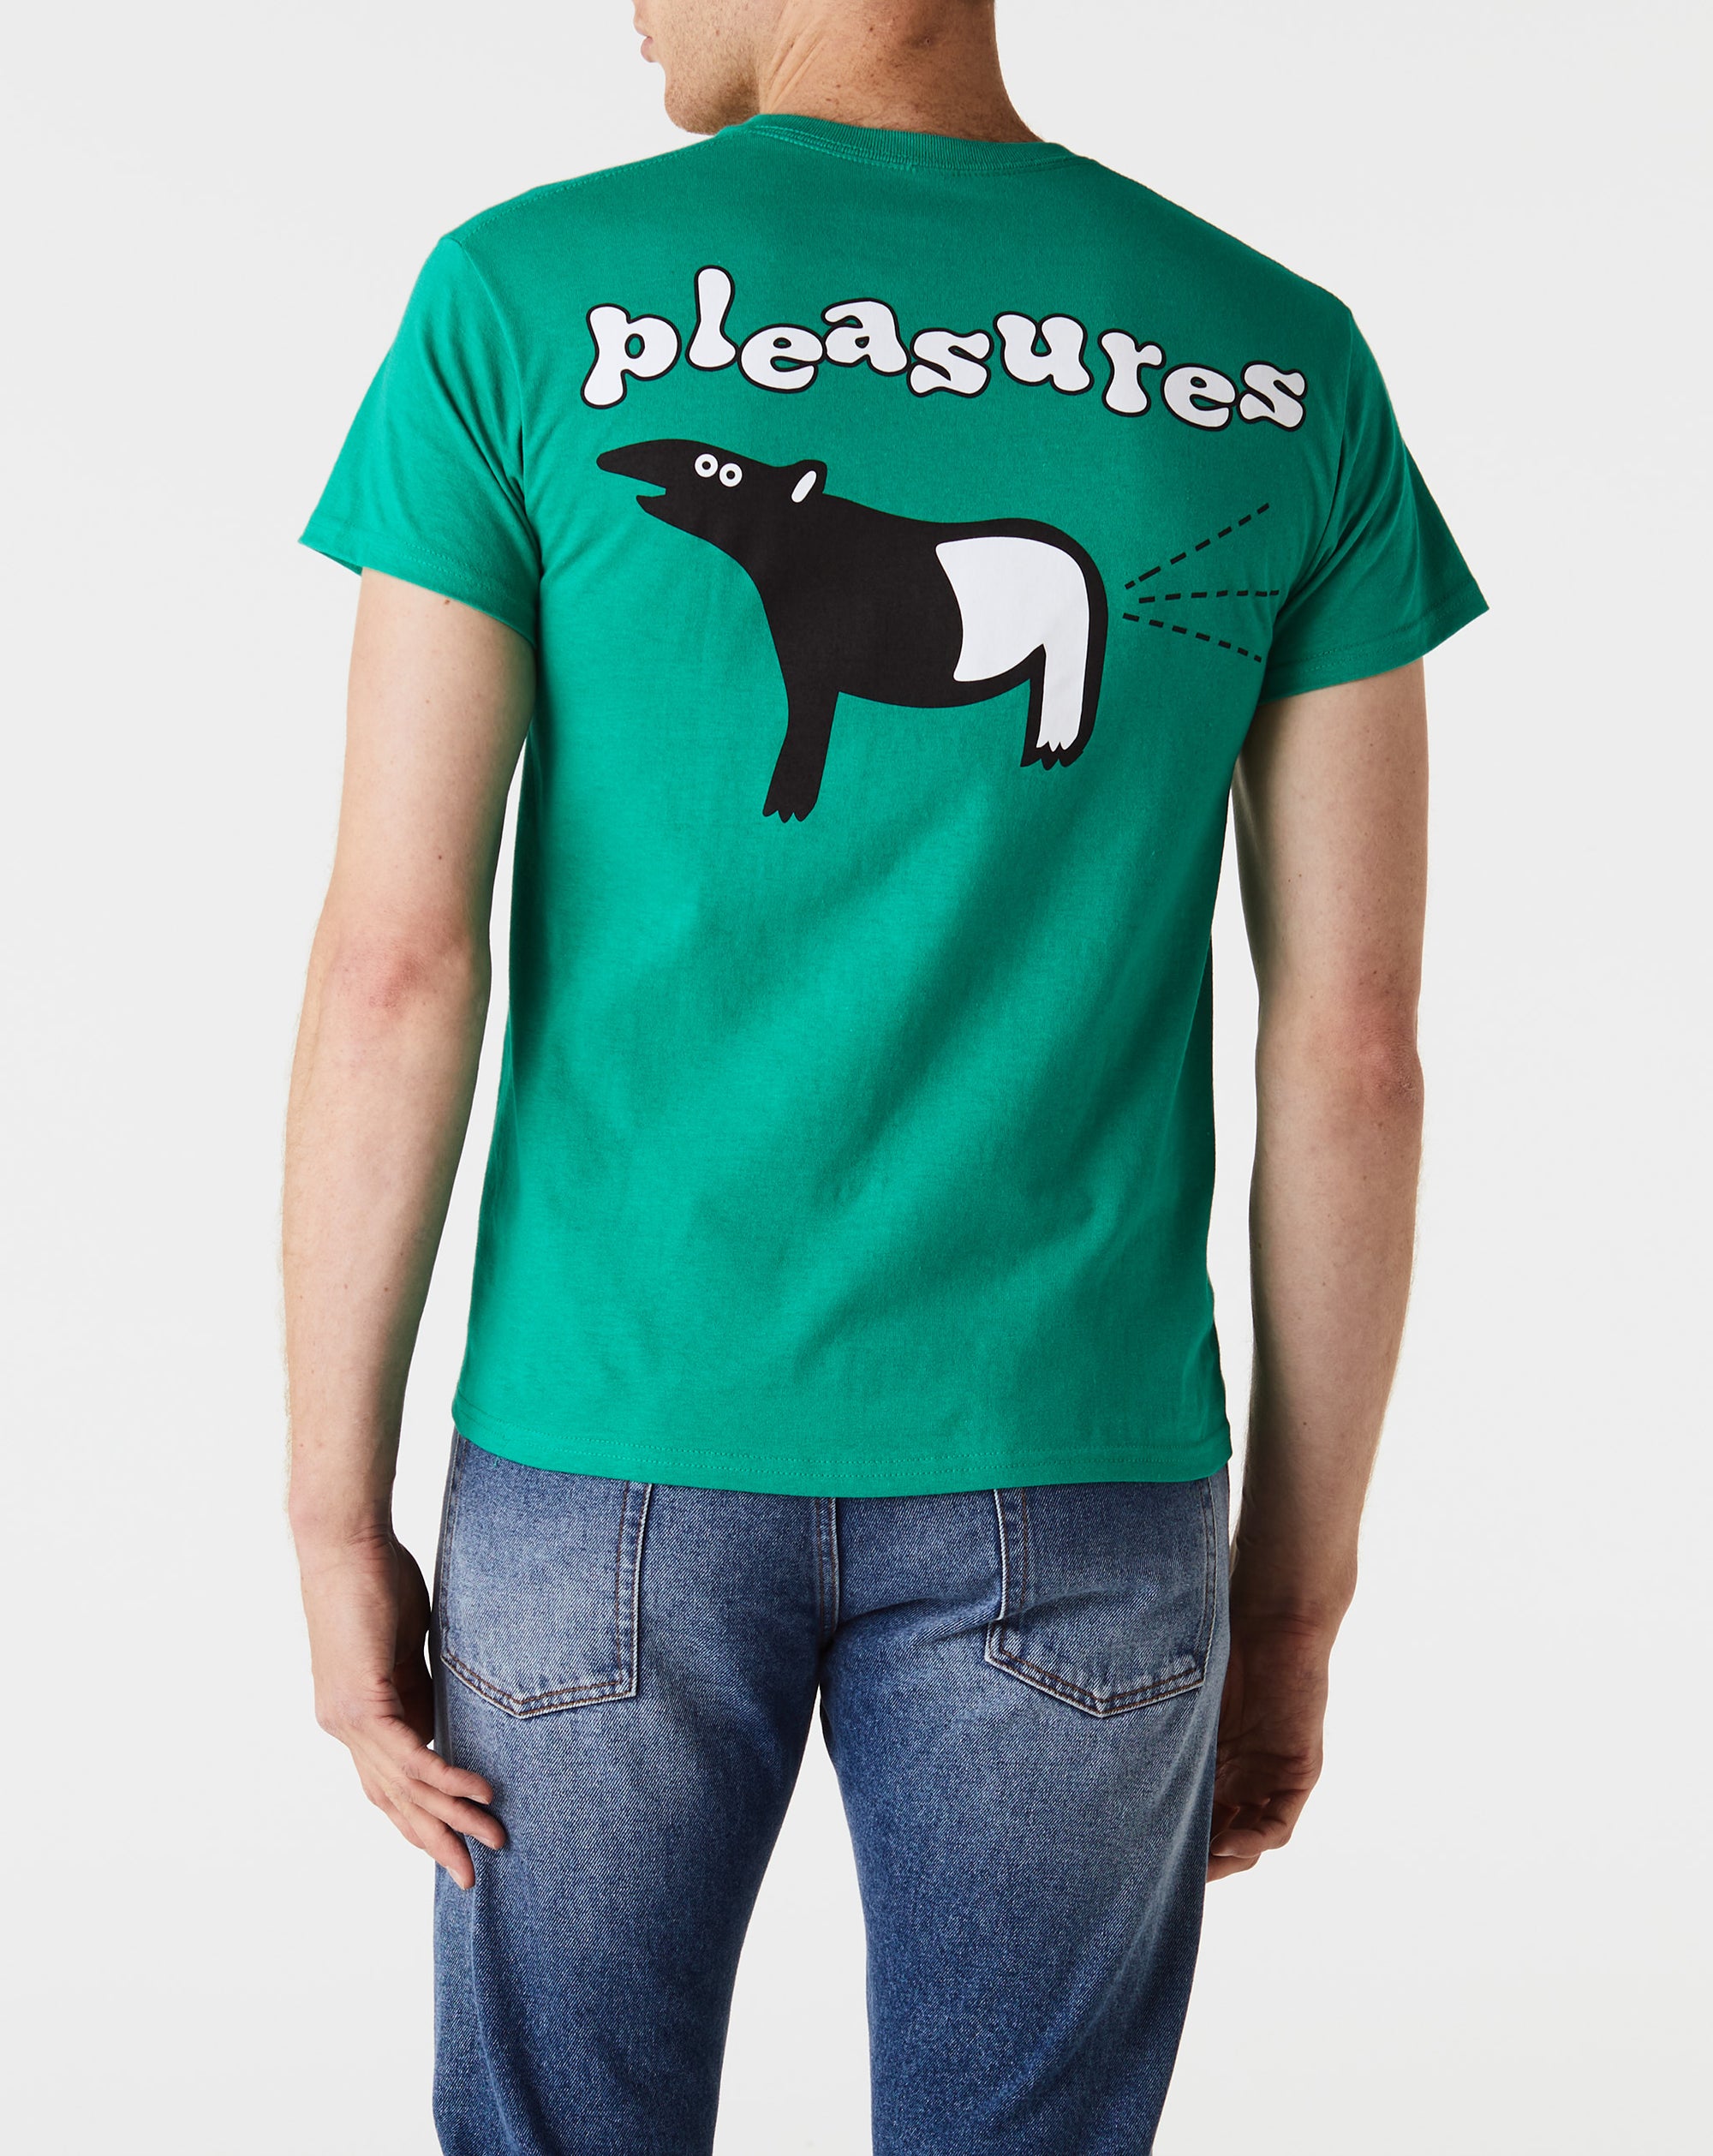 Pleasures Table T-Shirt - Rule of Next Apparel